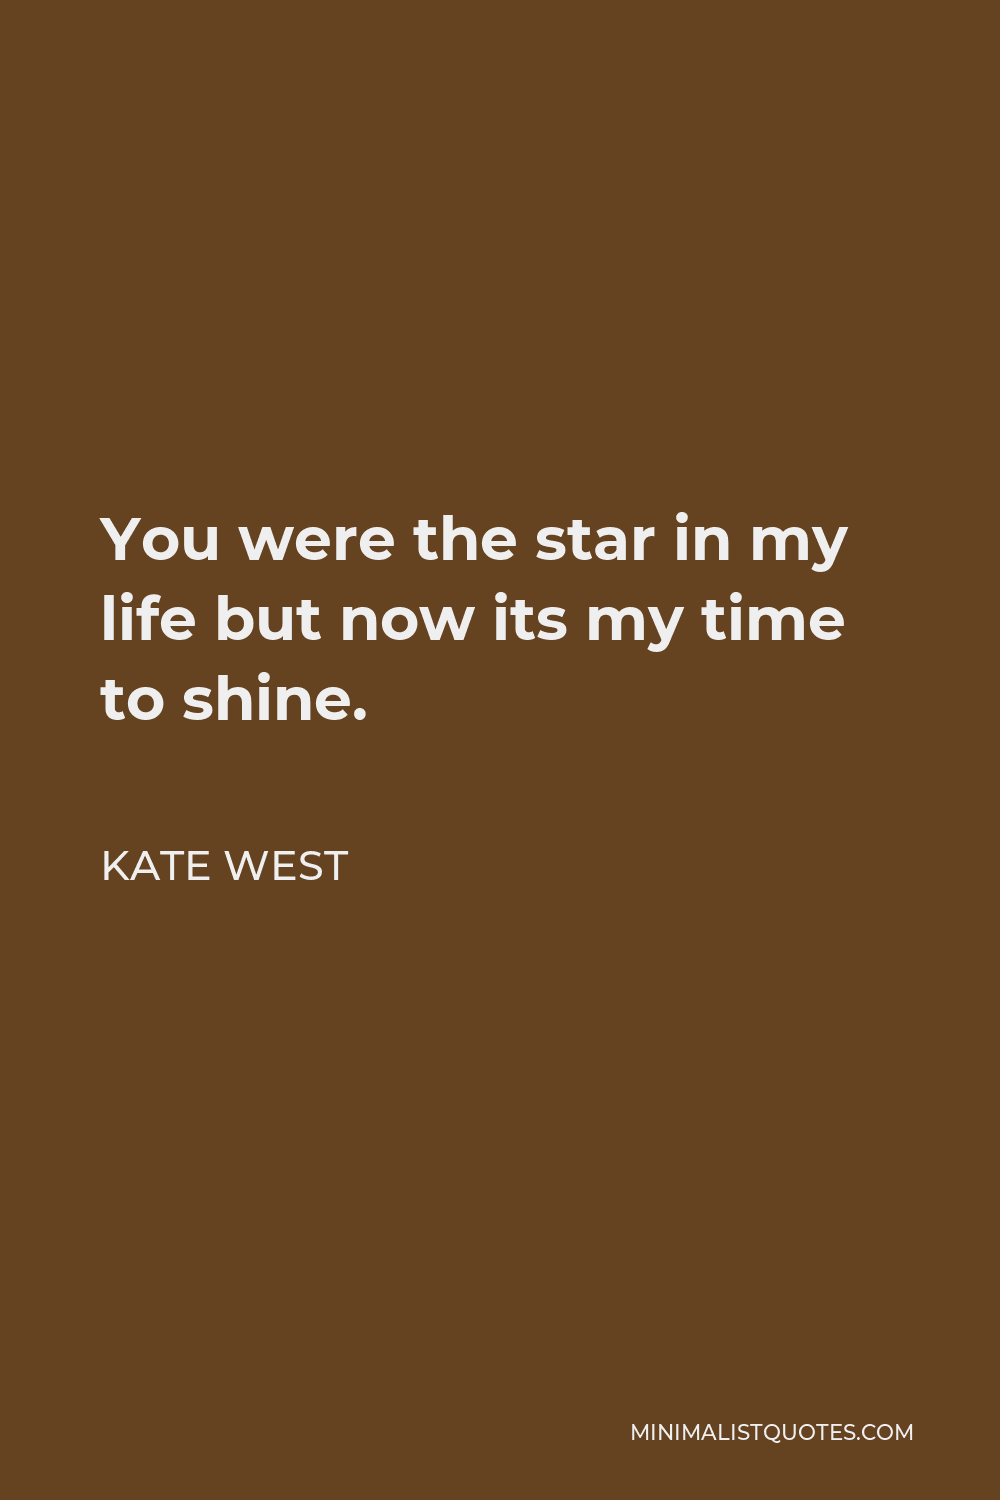 Kate West Quote - You were the star in my life but now its my time to shine.